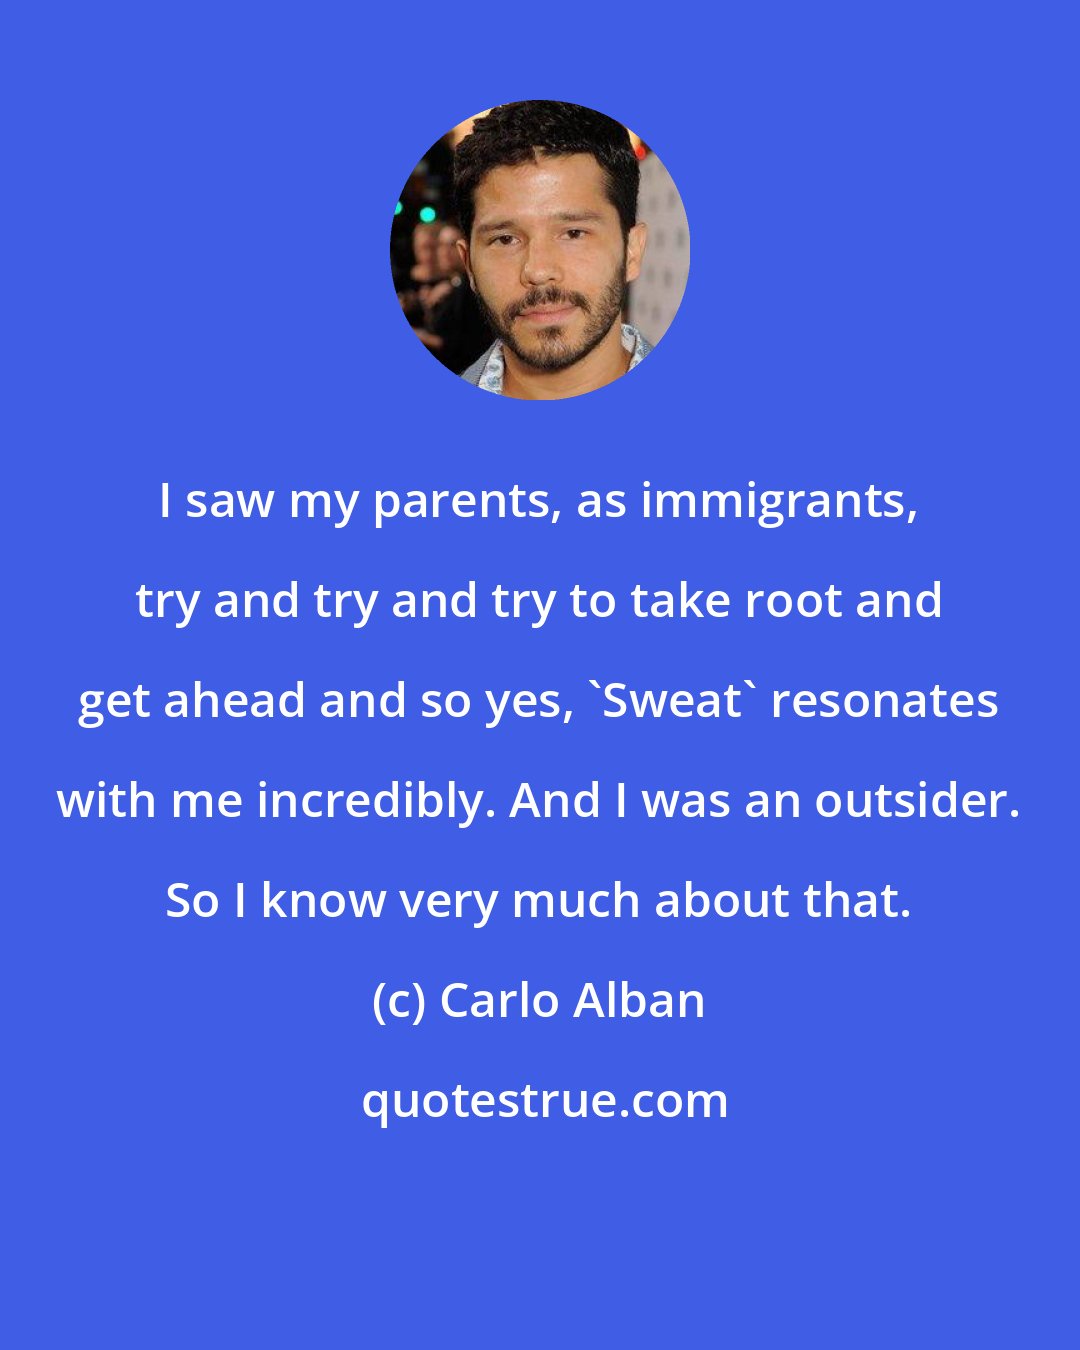 Carlo Alban: I saw my parents, as immigrants, try and try and try to take root and get ahead and so yes, 'Sweat' resonates with me incredibly. And I was an outsider. So I know very much about that.